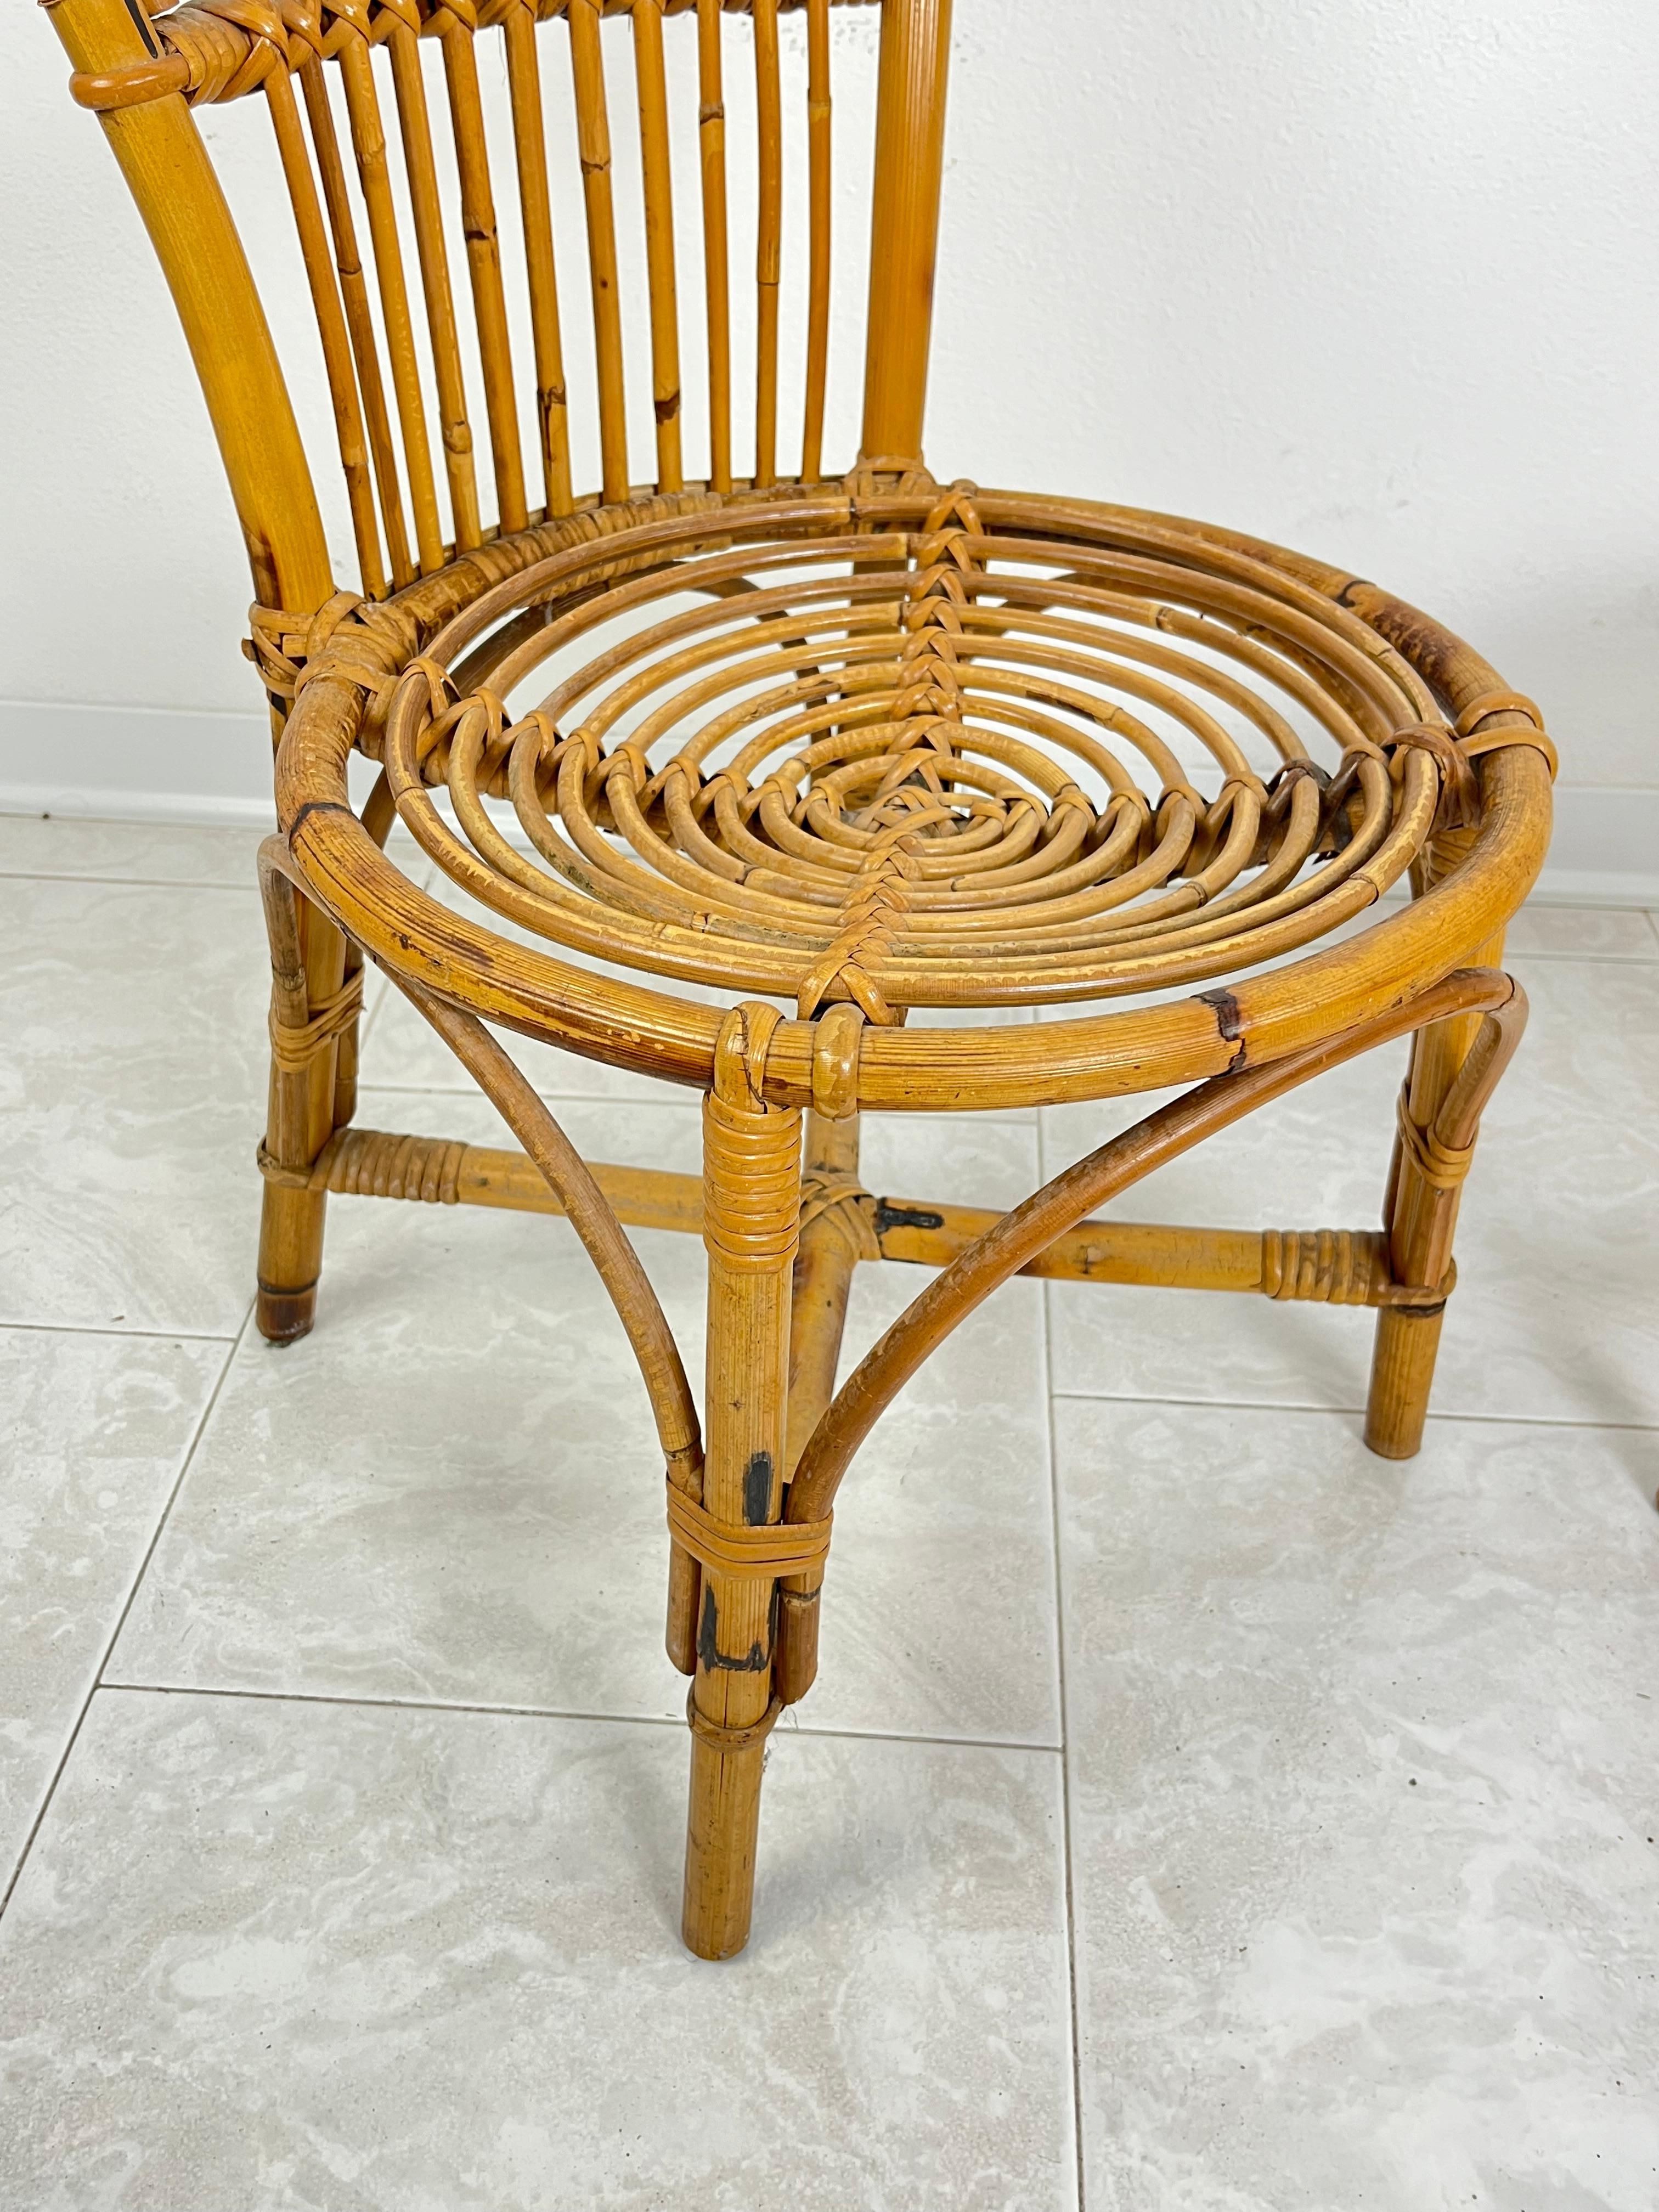 Set of 2 Small Mid-Century Bamboo Chairs, Italian Design 1950s For Sale 4